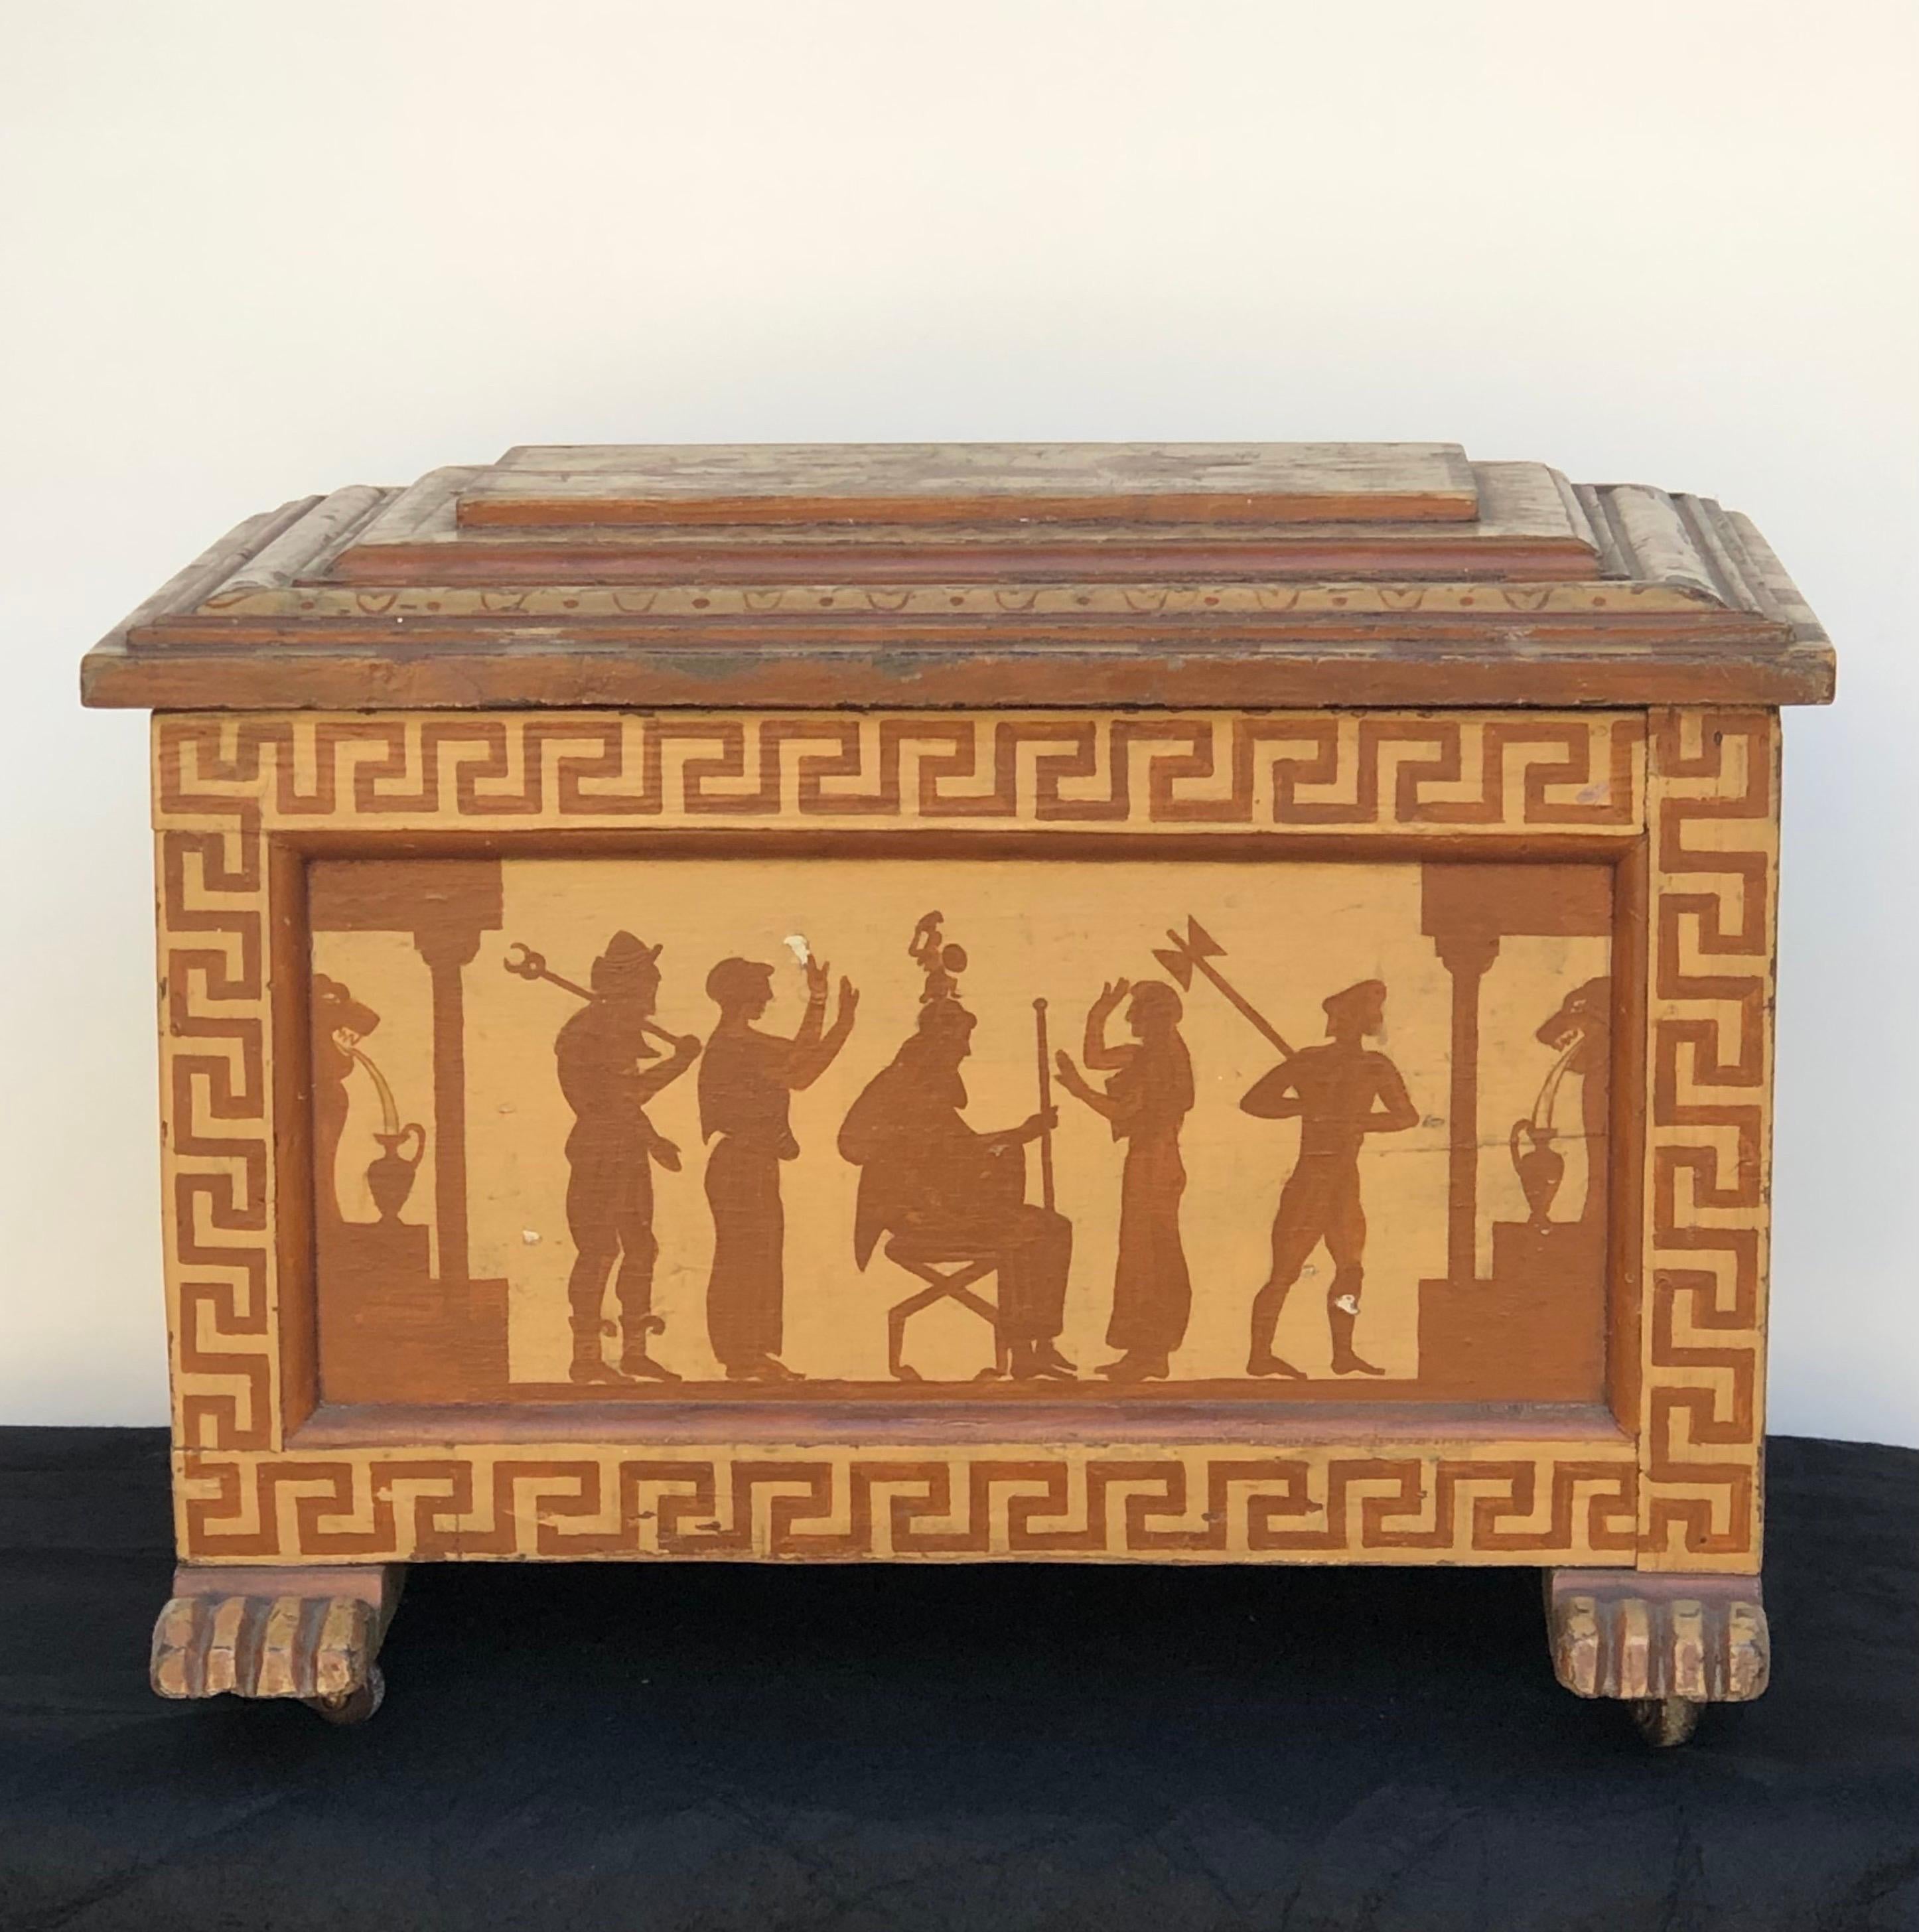 English Hand-Painted Regency Style Sarcophagus Egyptian Revival Kindling Box.